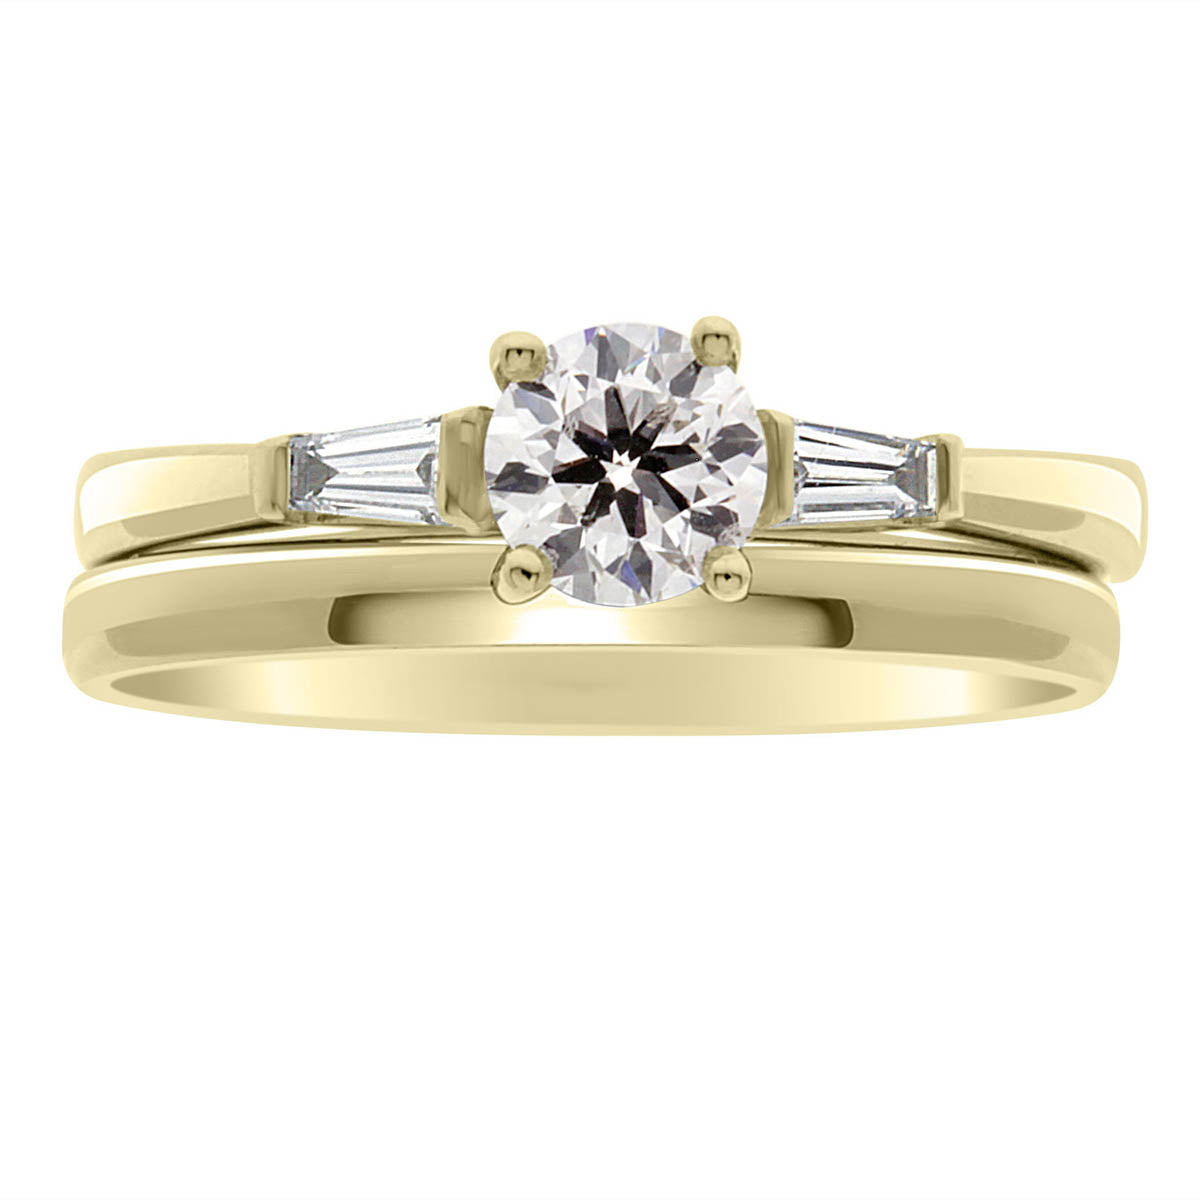 Round Solitaire With Tapered Baguettes made from yellow gold with a plain wedding band